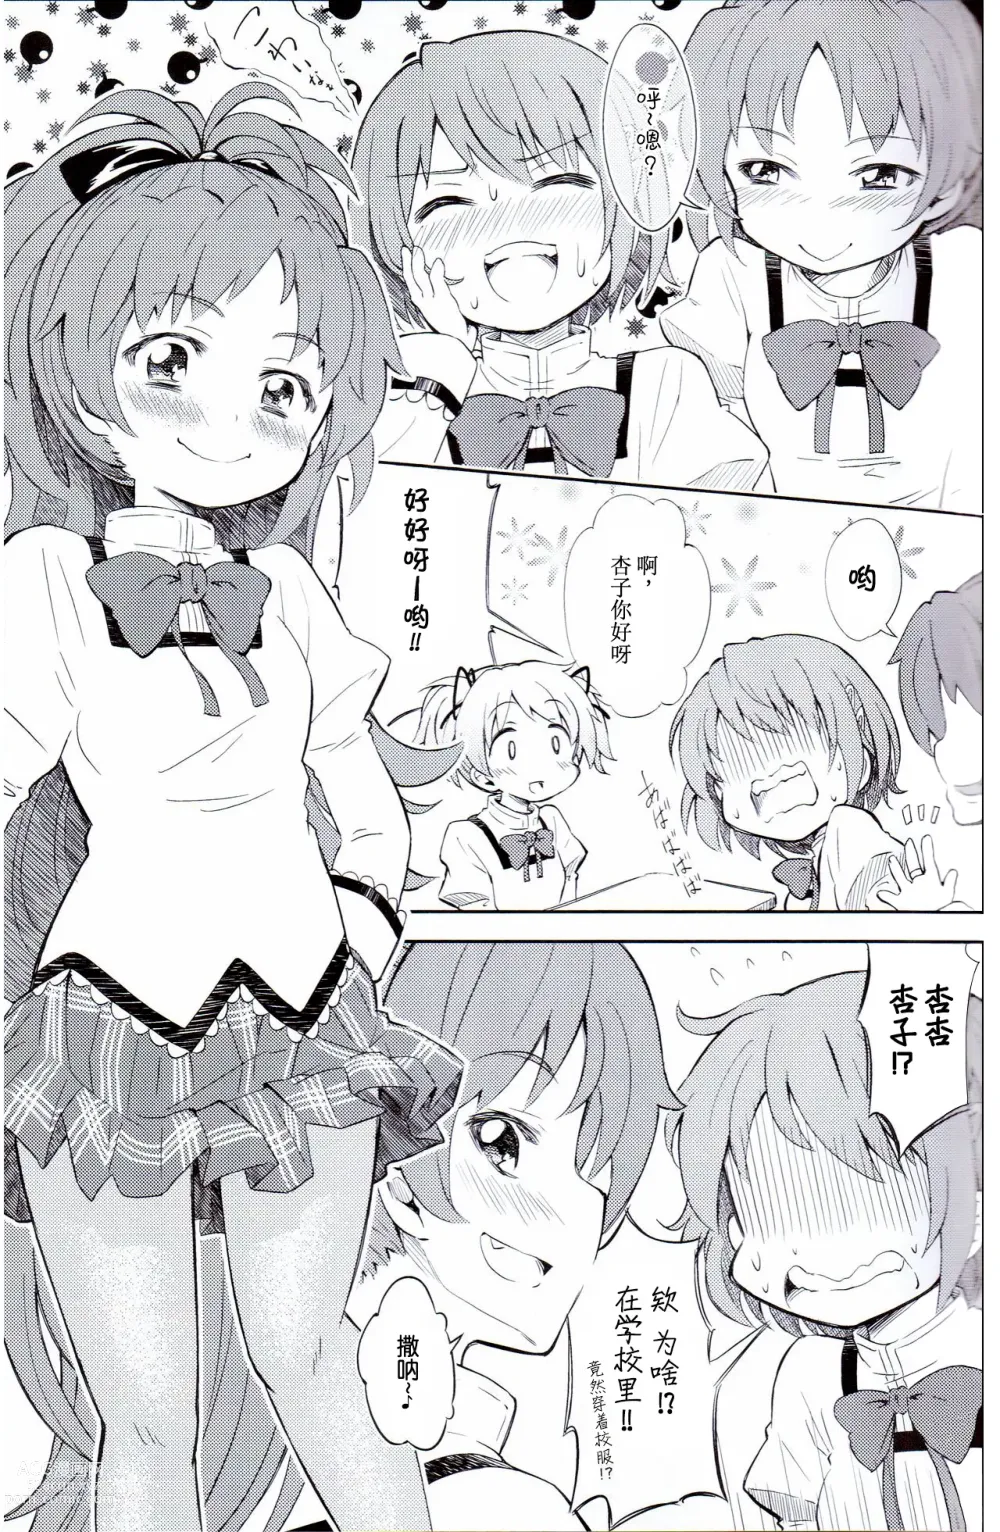 Page 6 of doujinshi Lovely Girls Lily vol. 5